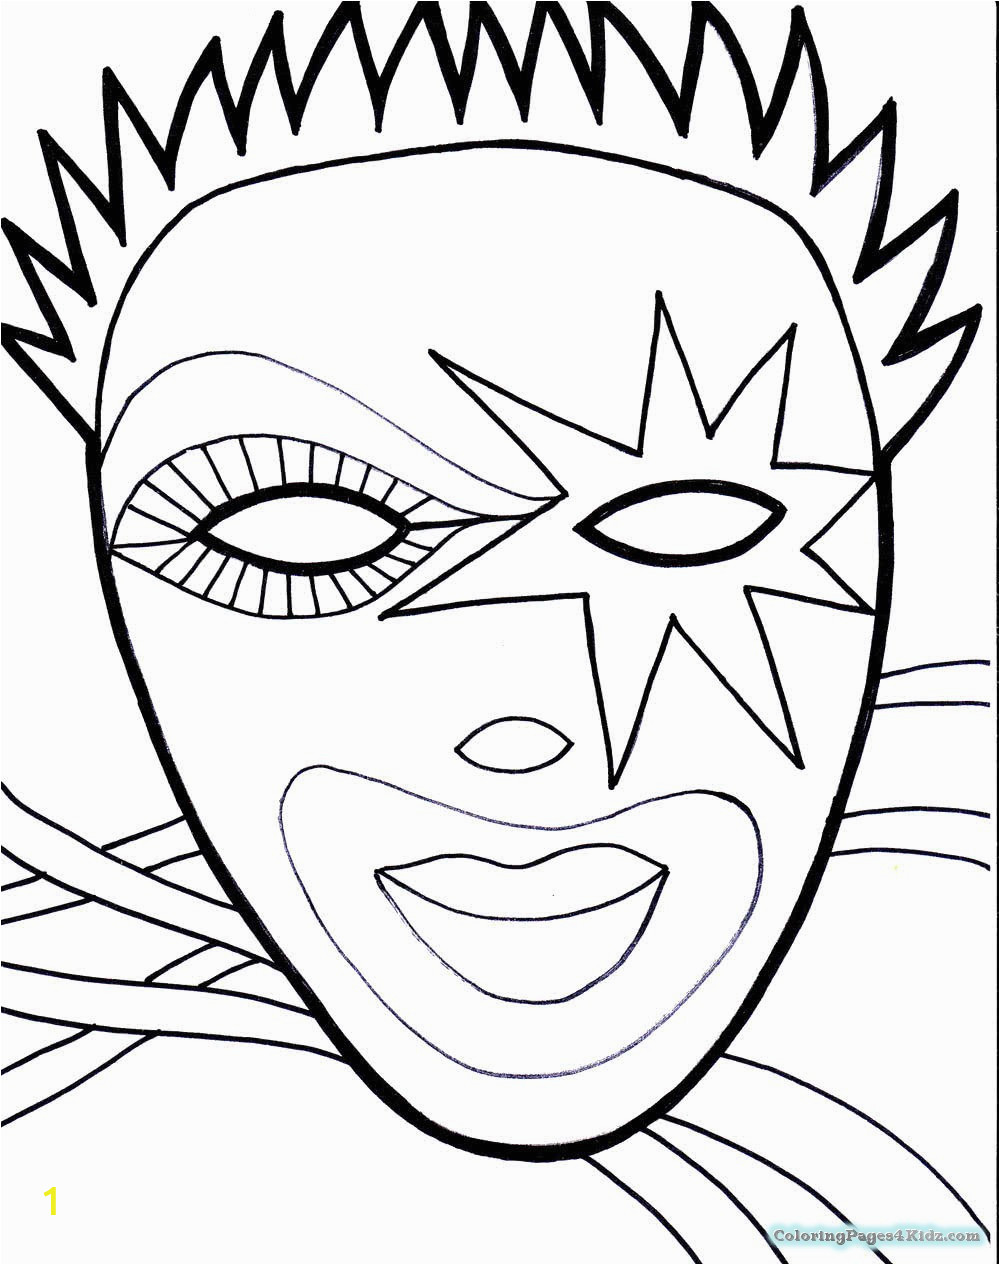 Coloring Pages Of Mardi Gras Masks Mardi Gras Mask for Boys Coloring Pages